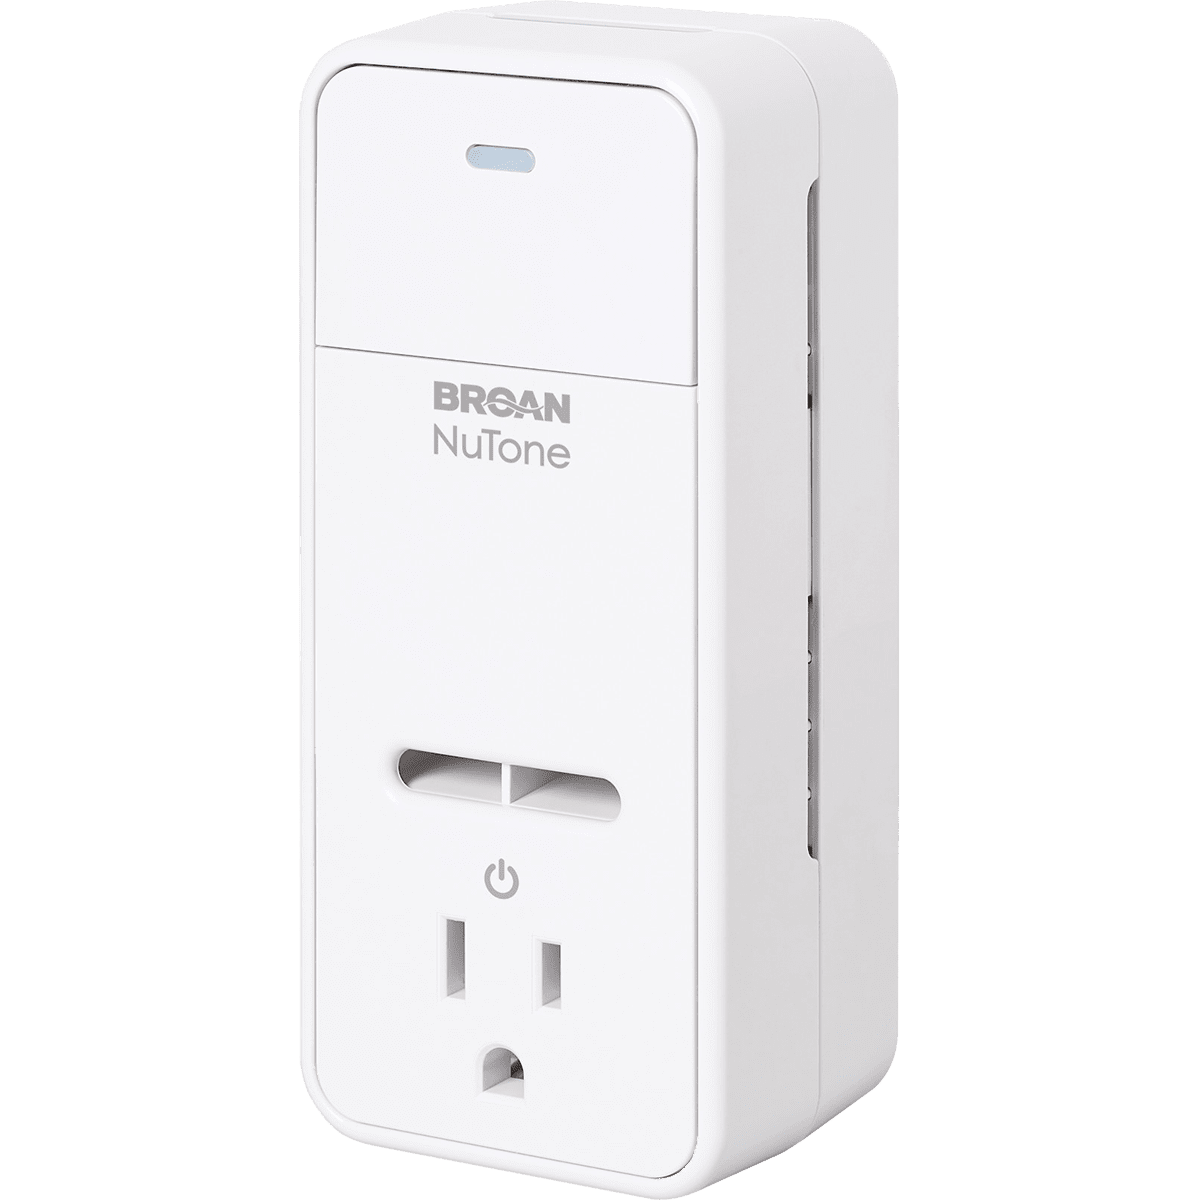 SPT 2.4ghz WiFi Enabled App Controlled Smart Plug, White